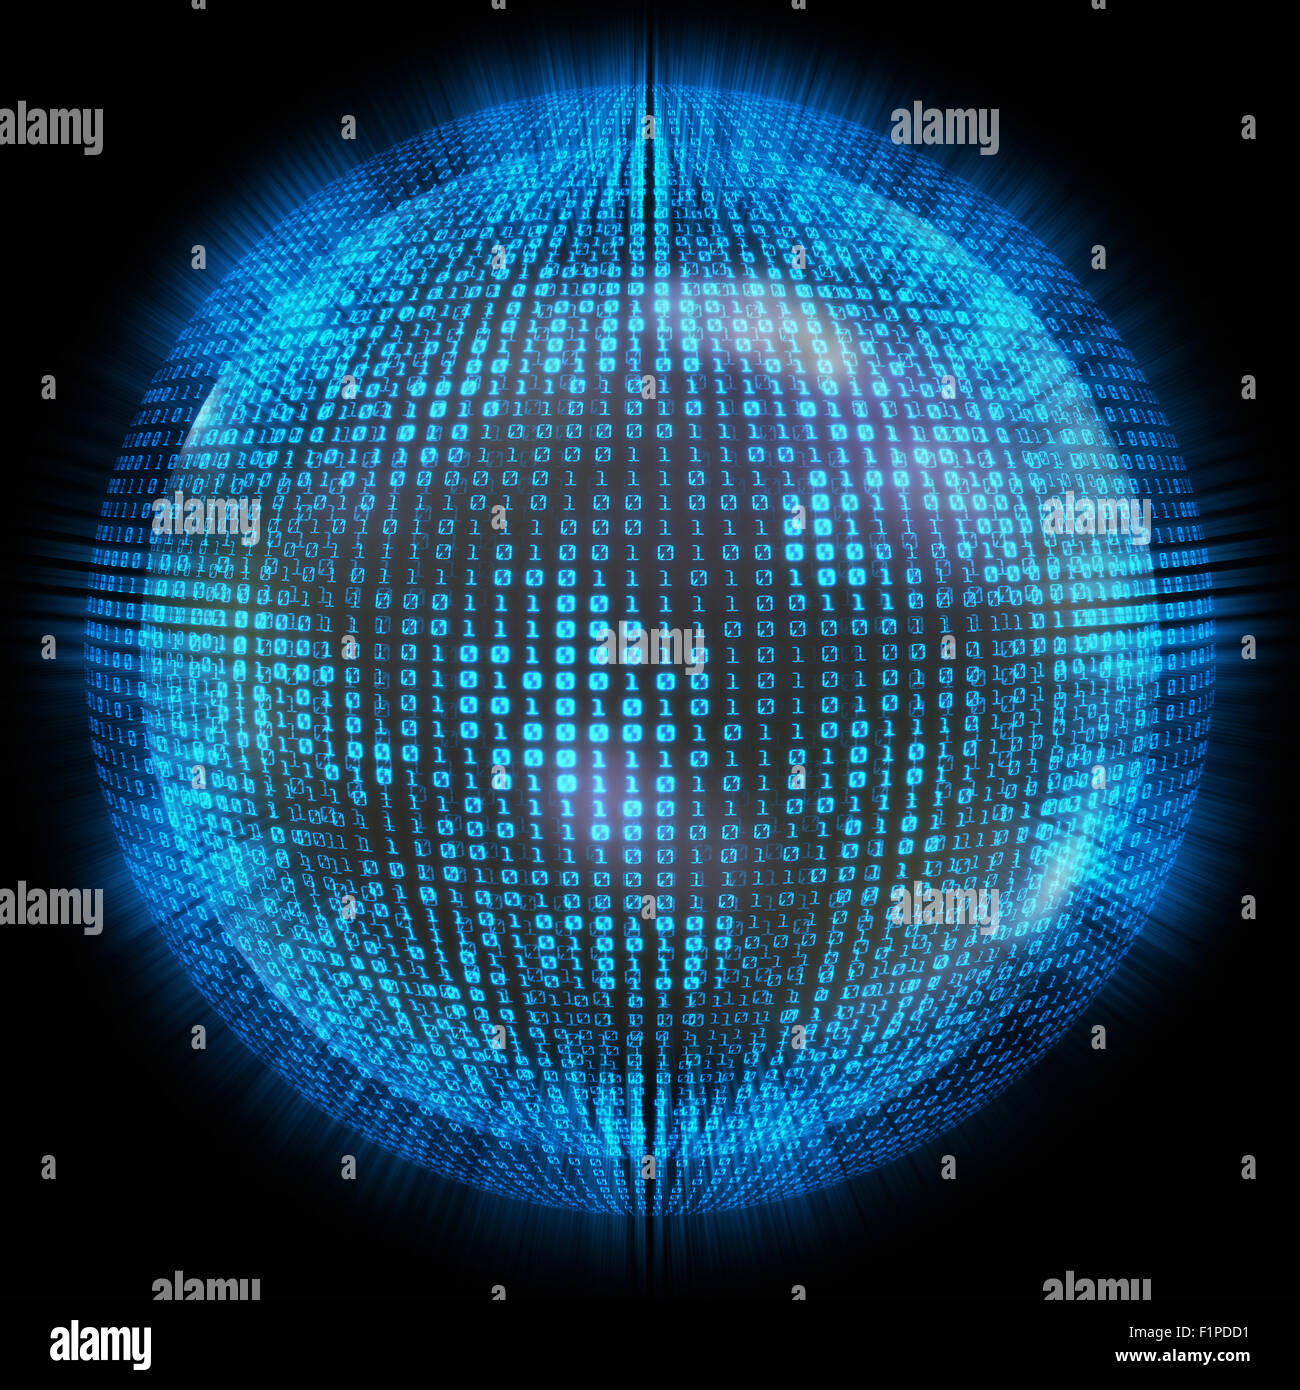 Binary code on a sphere, computer illustration. Stock Photo